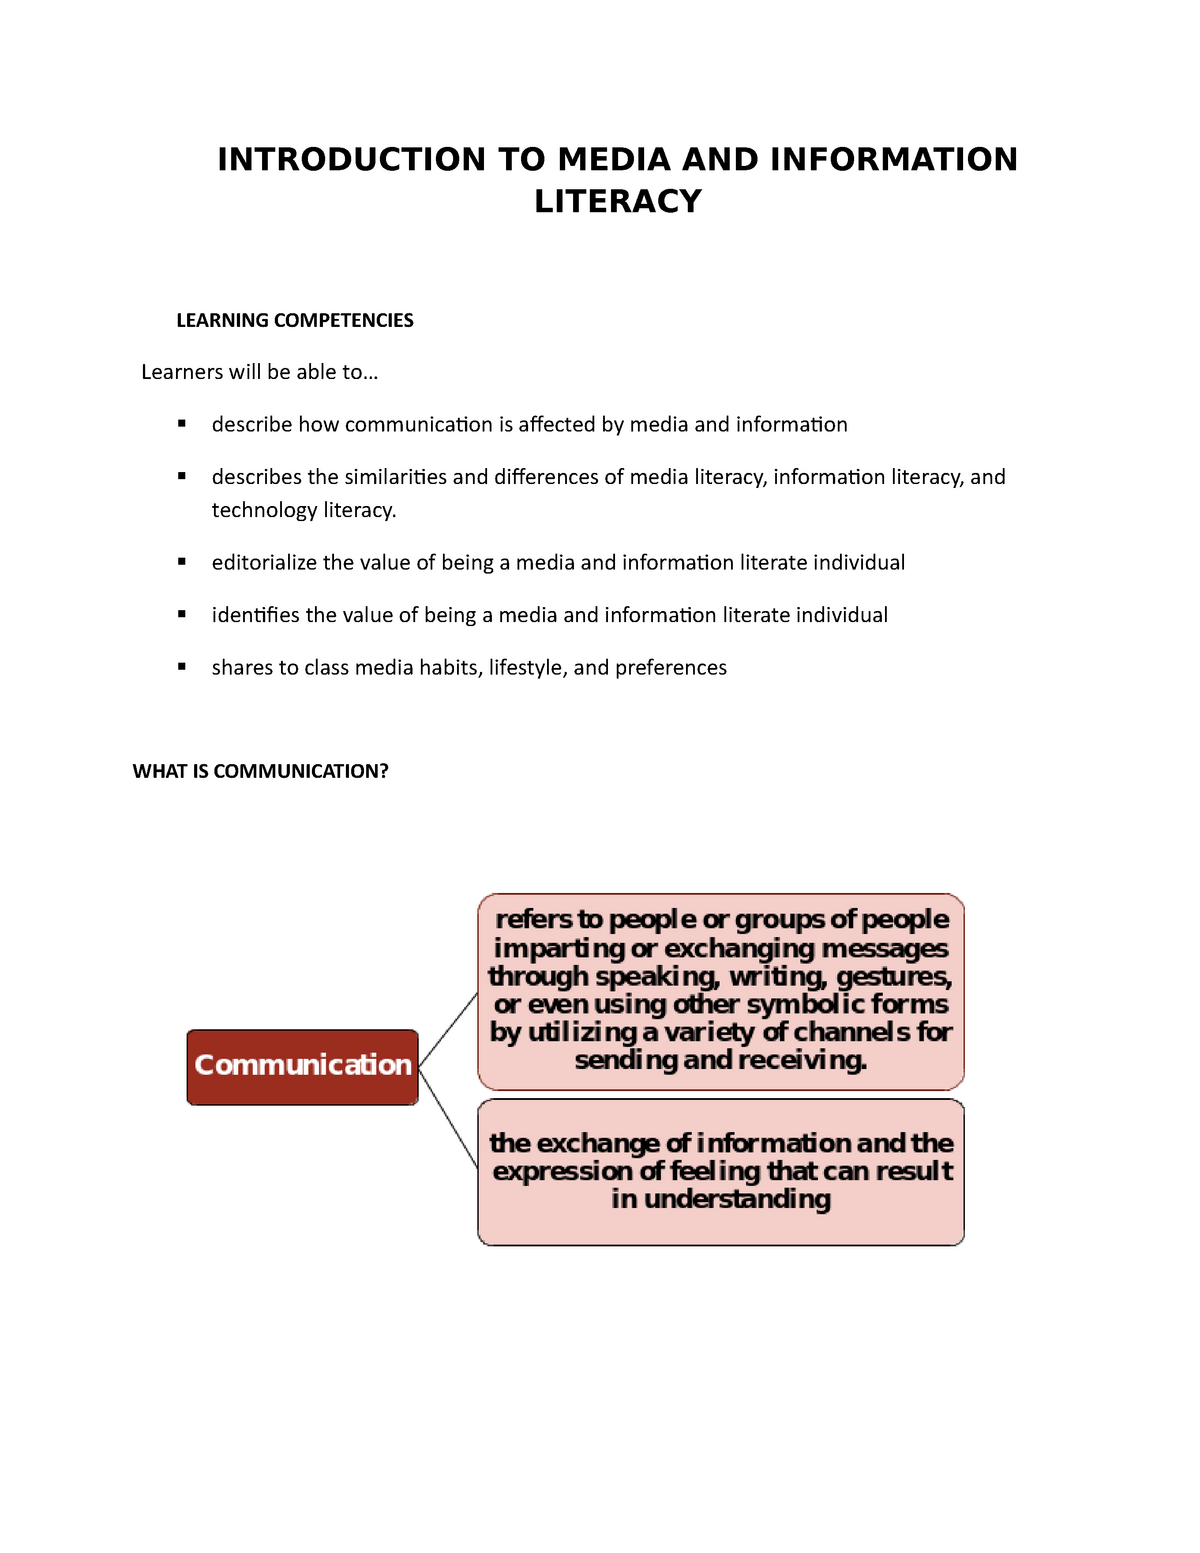 essay on media and information literacy